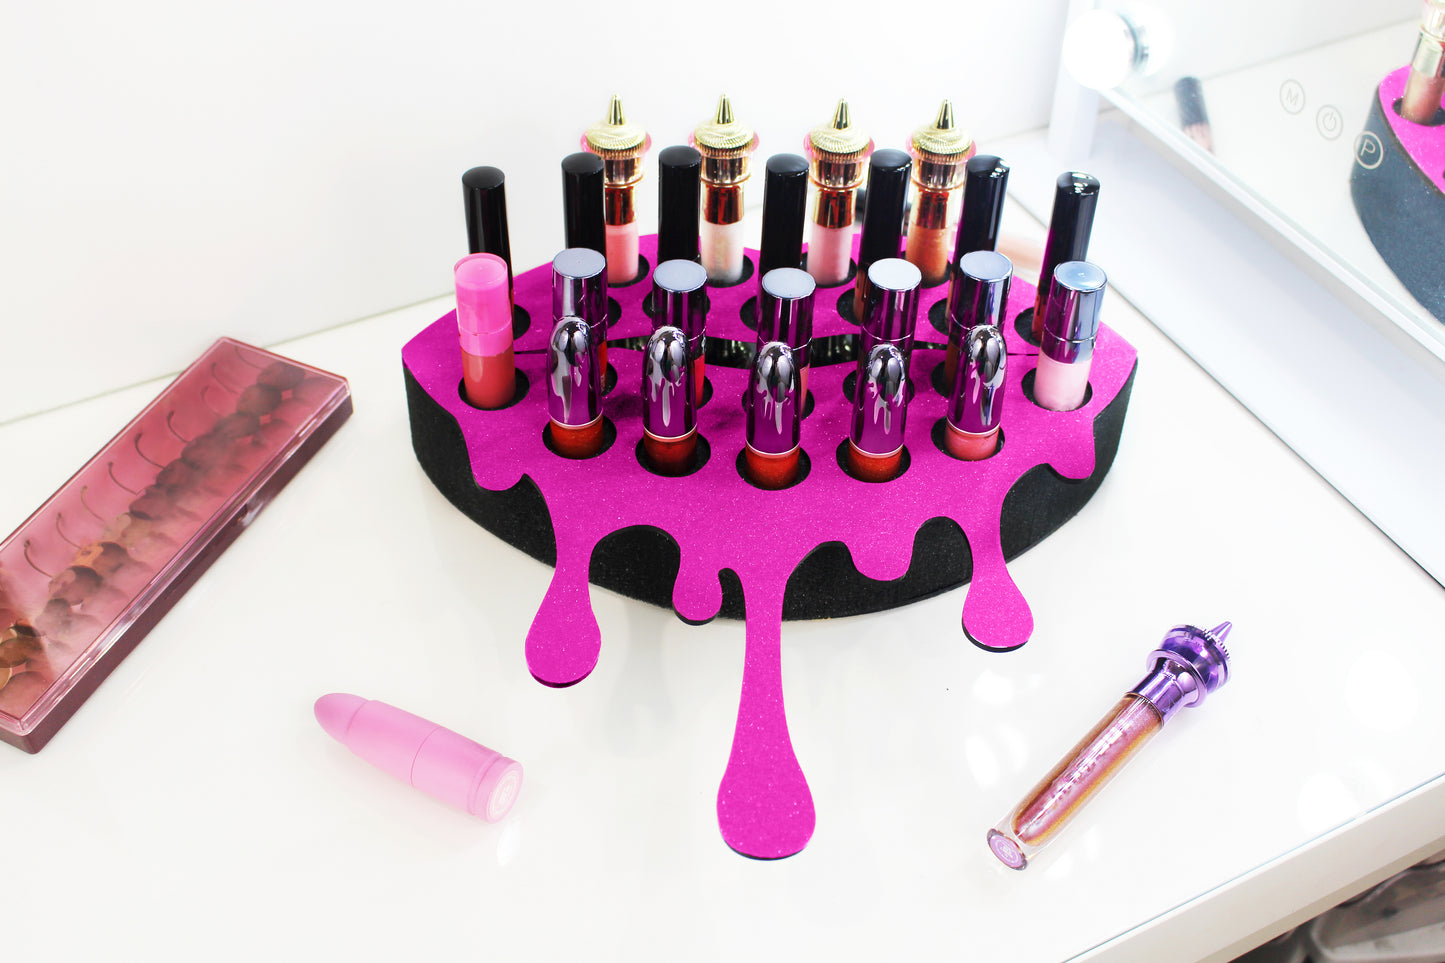 Dark Pink Medium Lip Design Lipstick Organizer holding 23 lipsticks mounted on the wall, keeping lipstick organized and easy to reach. This wall mounted makeup organizer looks like art on the wall of your bathroom or makeup room. Shown being used to organize makeup sitting on a makeup vanity.